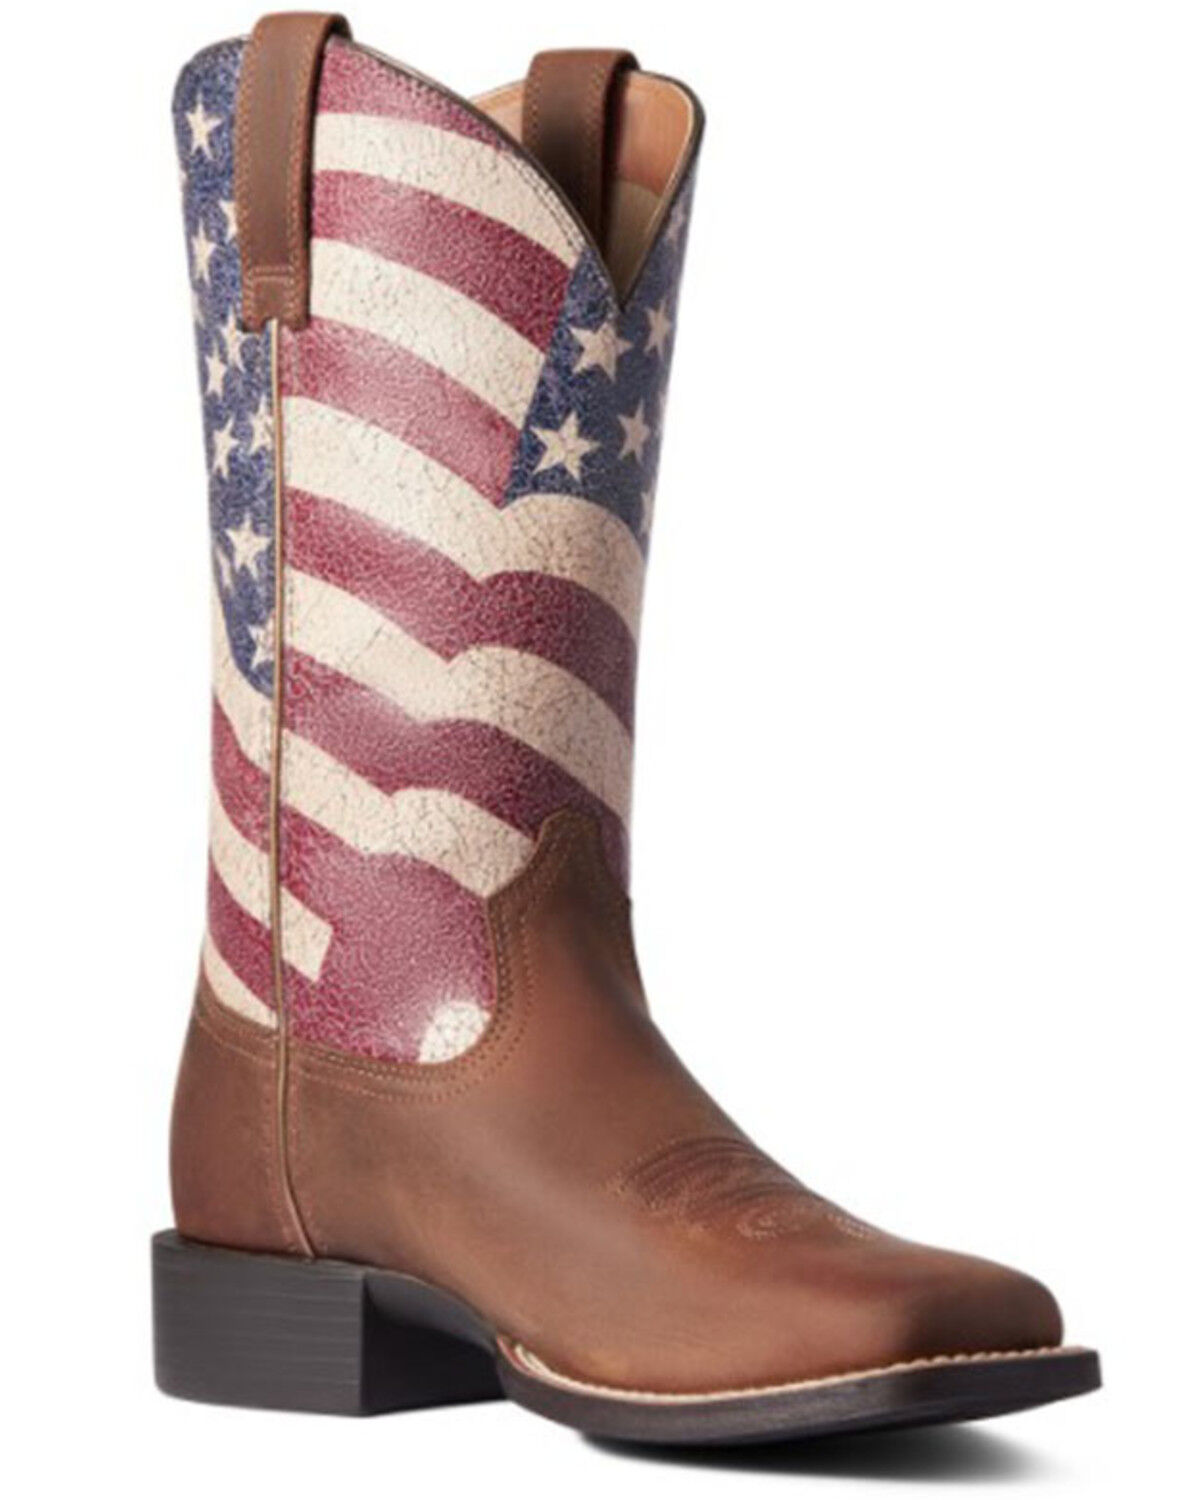 New York boots Usa patriotic Women's Canvas Boots,Custom patriot boot,woman usa flag,custom shoes punk  pride shoes,liberty statue boots